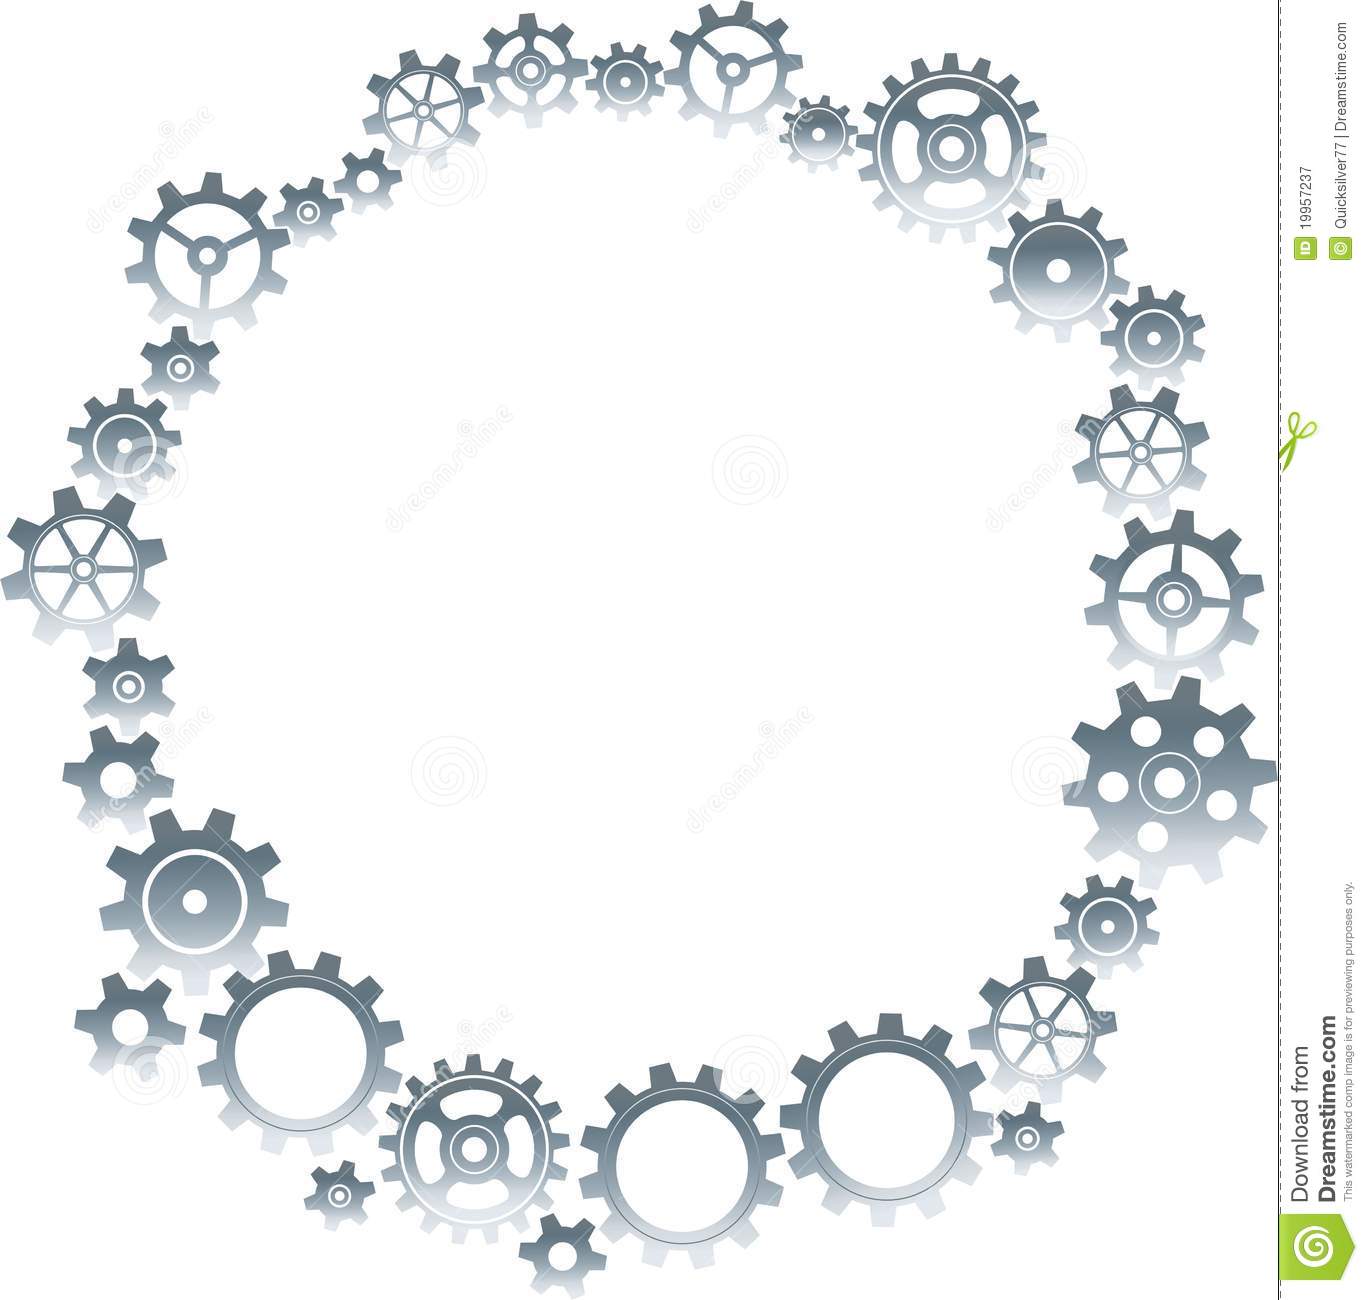 Cogs In Round Frame Border Royalty Free Stock Photography   Image